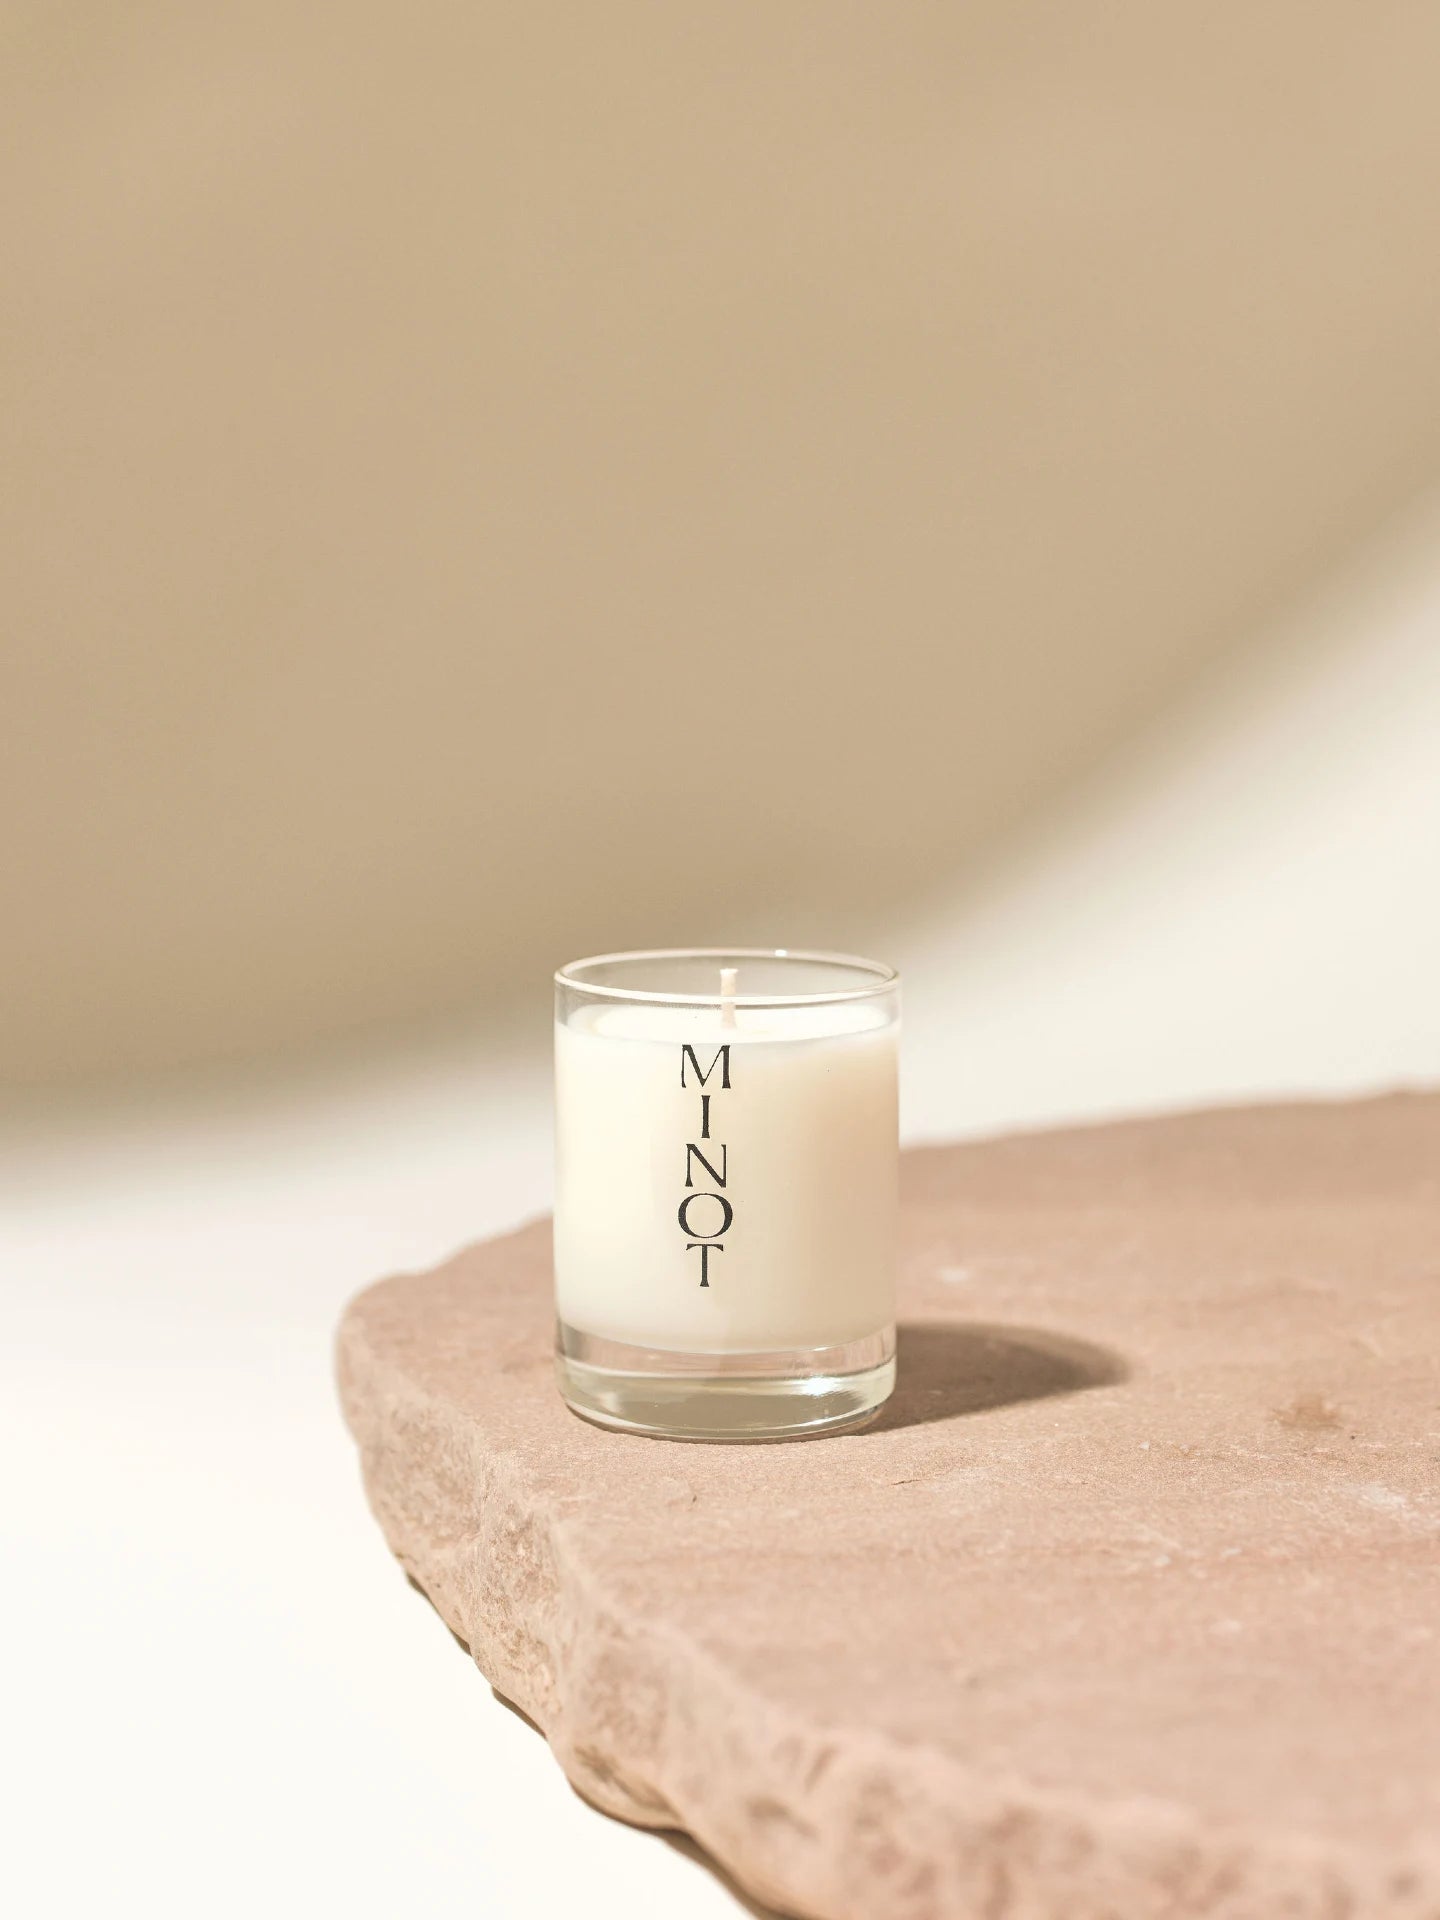 The all-natural Wild Meadow Mini soy wax candle features lilac, honeysuckle, and amyris scents